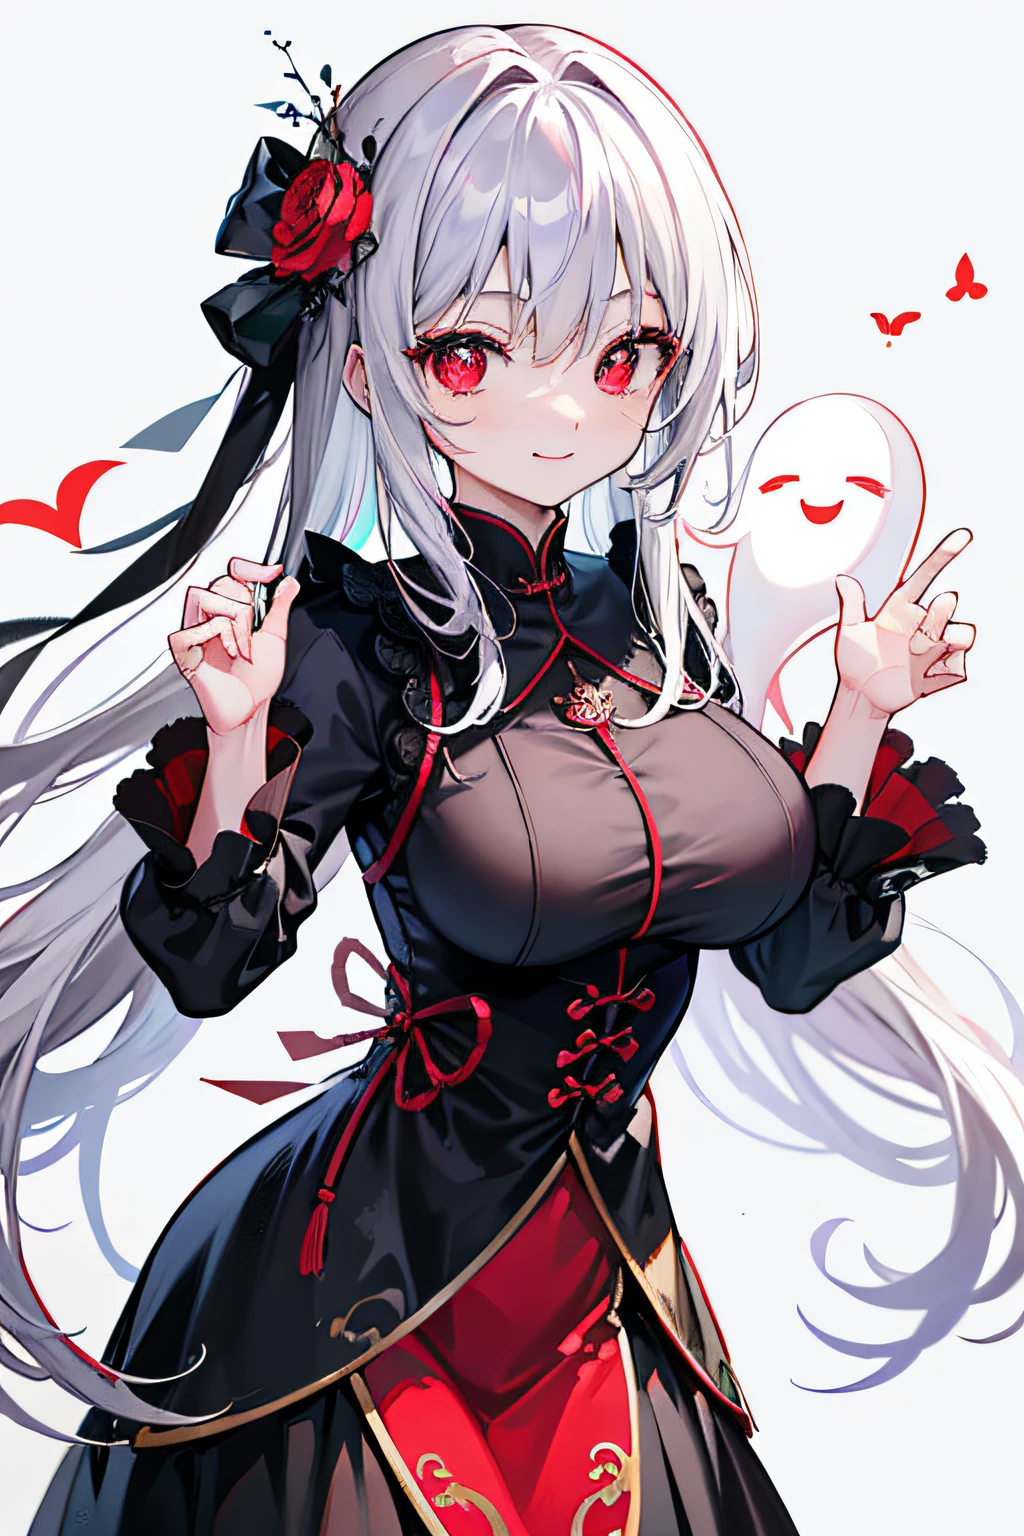 Best quality at best， Ultra-high resolution， Chiquita， Dark Gothic suit， adolable，Two ghost dolls on his hands ， full bodyesbian， smiling at me， red eyes， flower pupils， sweet， big breasts beautiful， adolable， care， is shy， hyper HD。White hair and red eyes